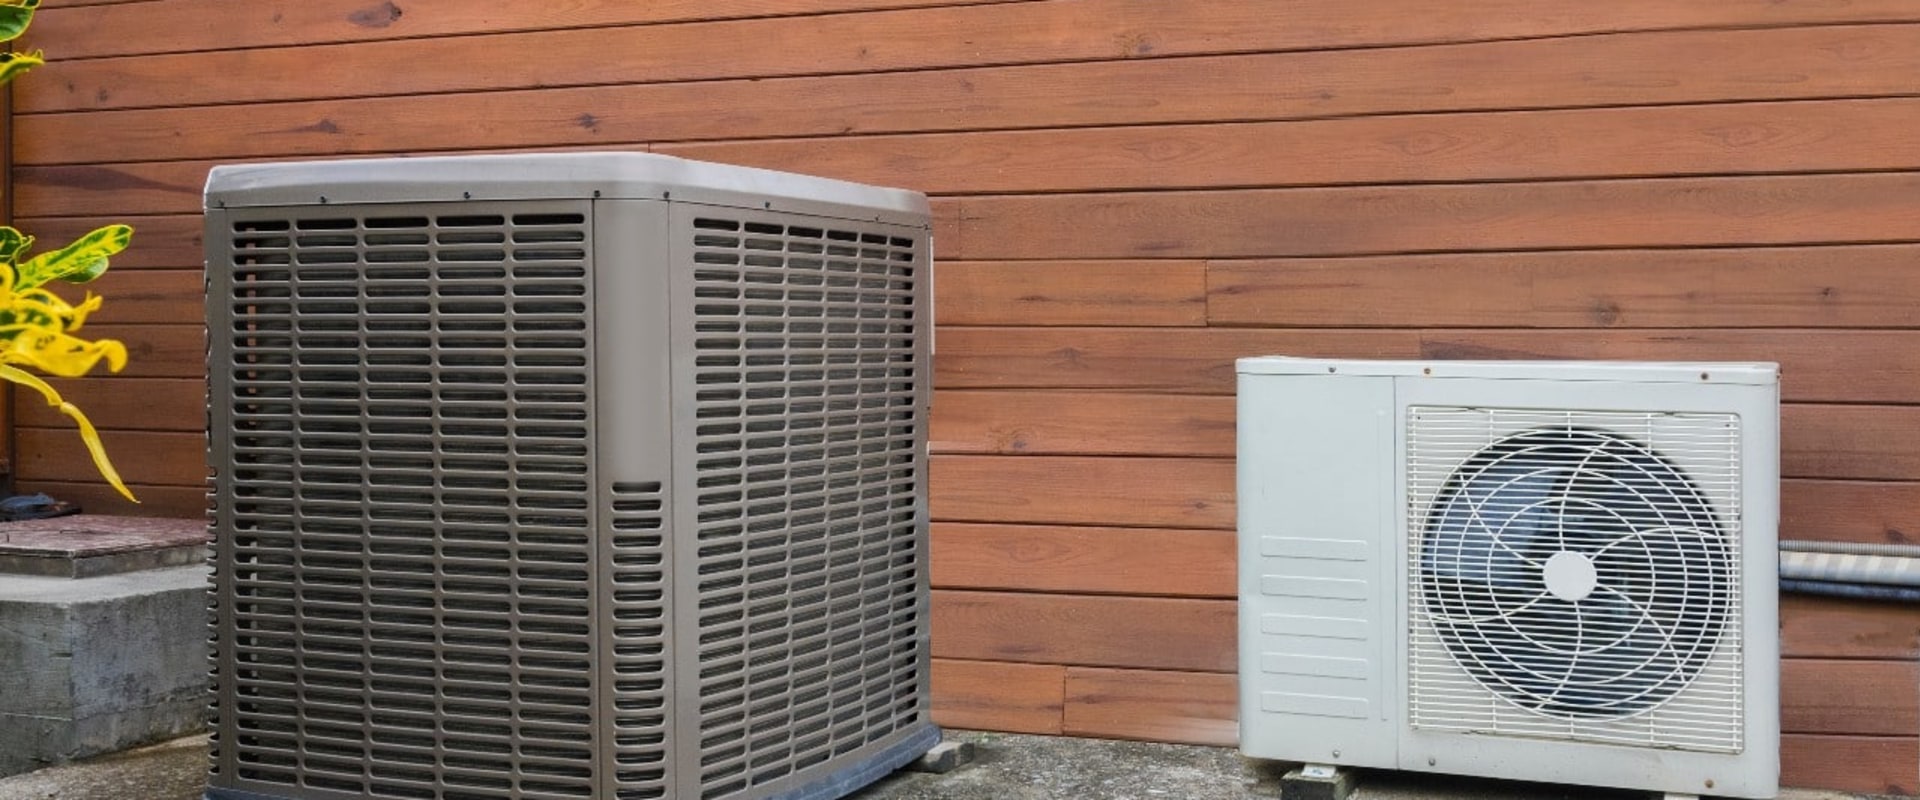 The Lifespan of Your HVAC System: How Long Can You Expect It to Last?